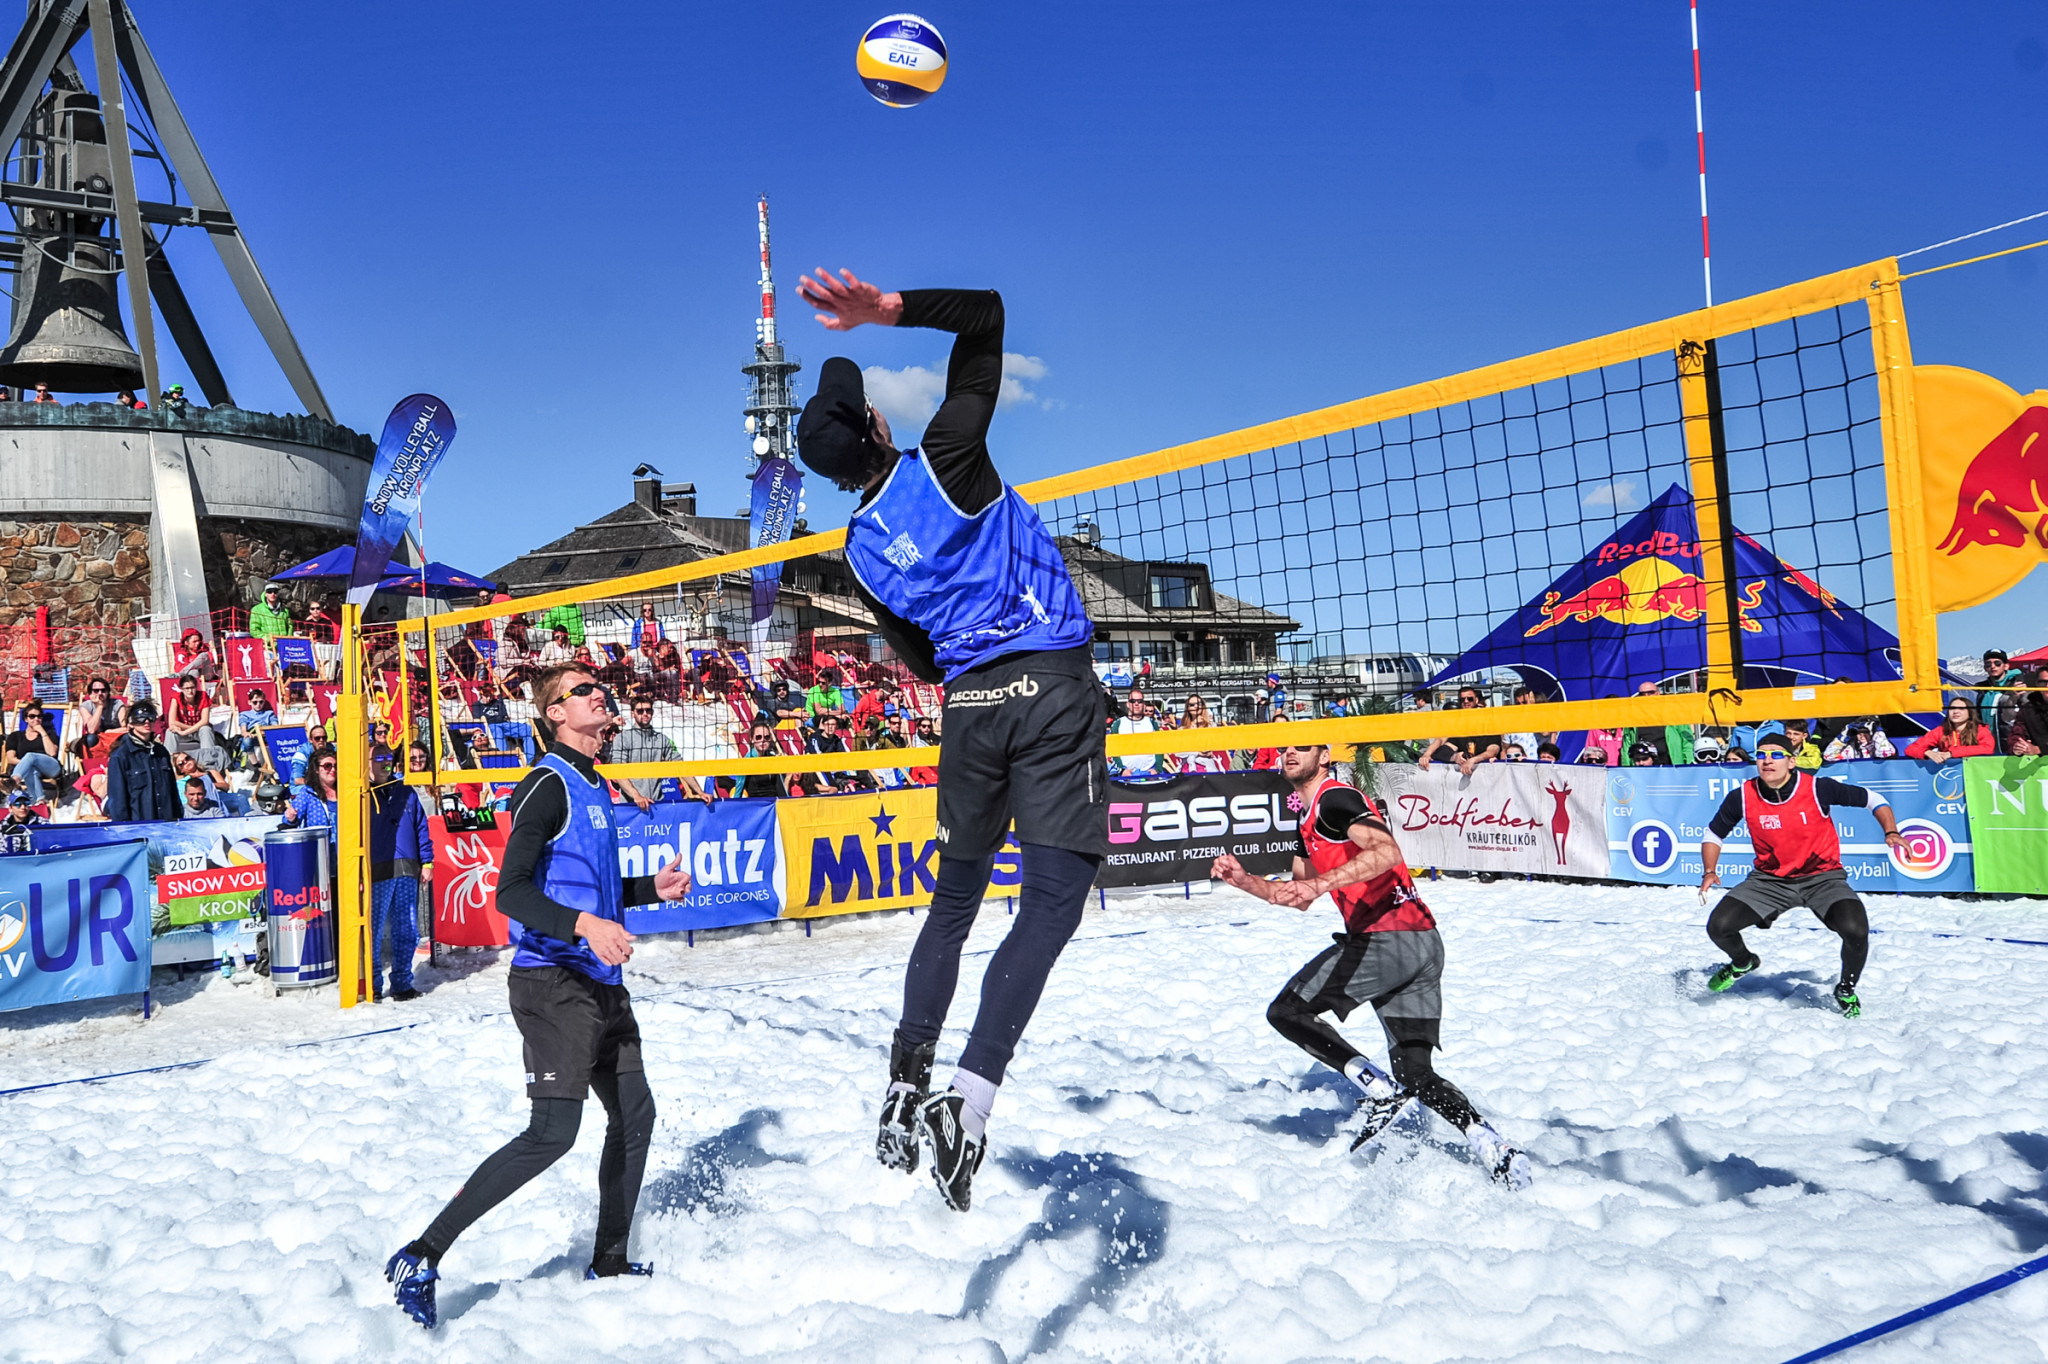 The FIVB previously announced an optimistic aim to have snow volleyball added to the Winter Olympics ©FIVB